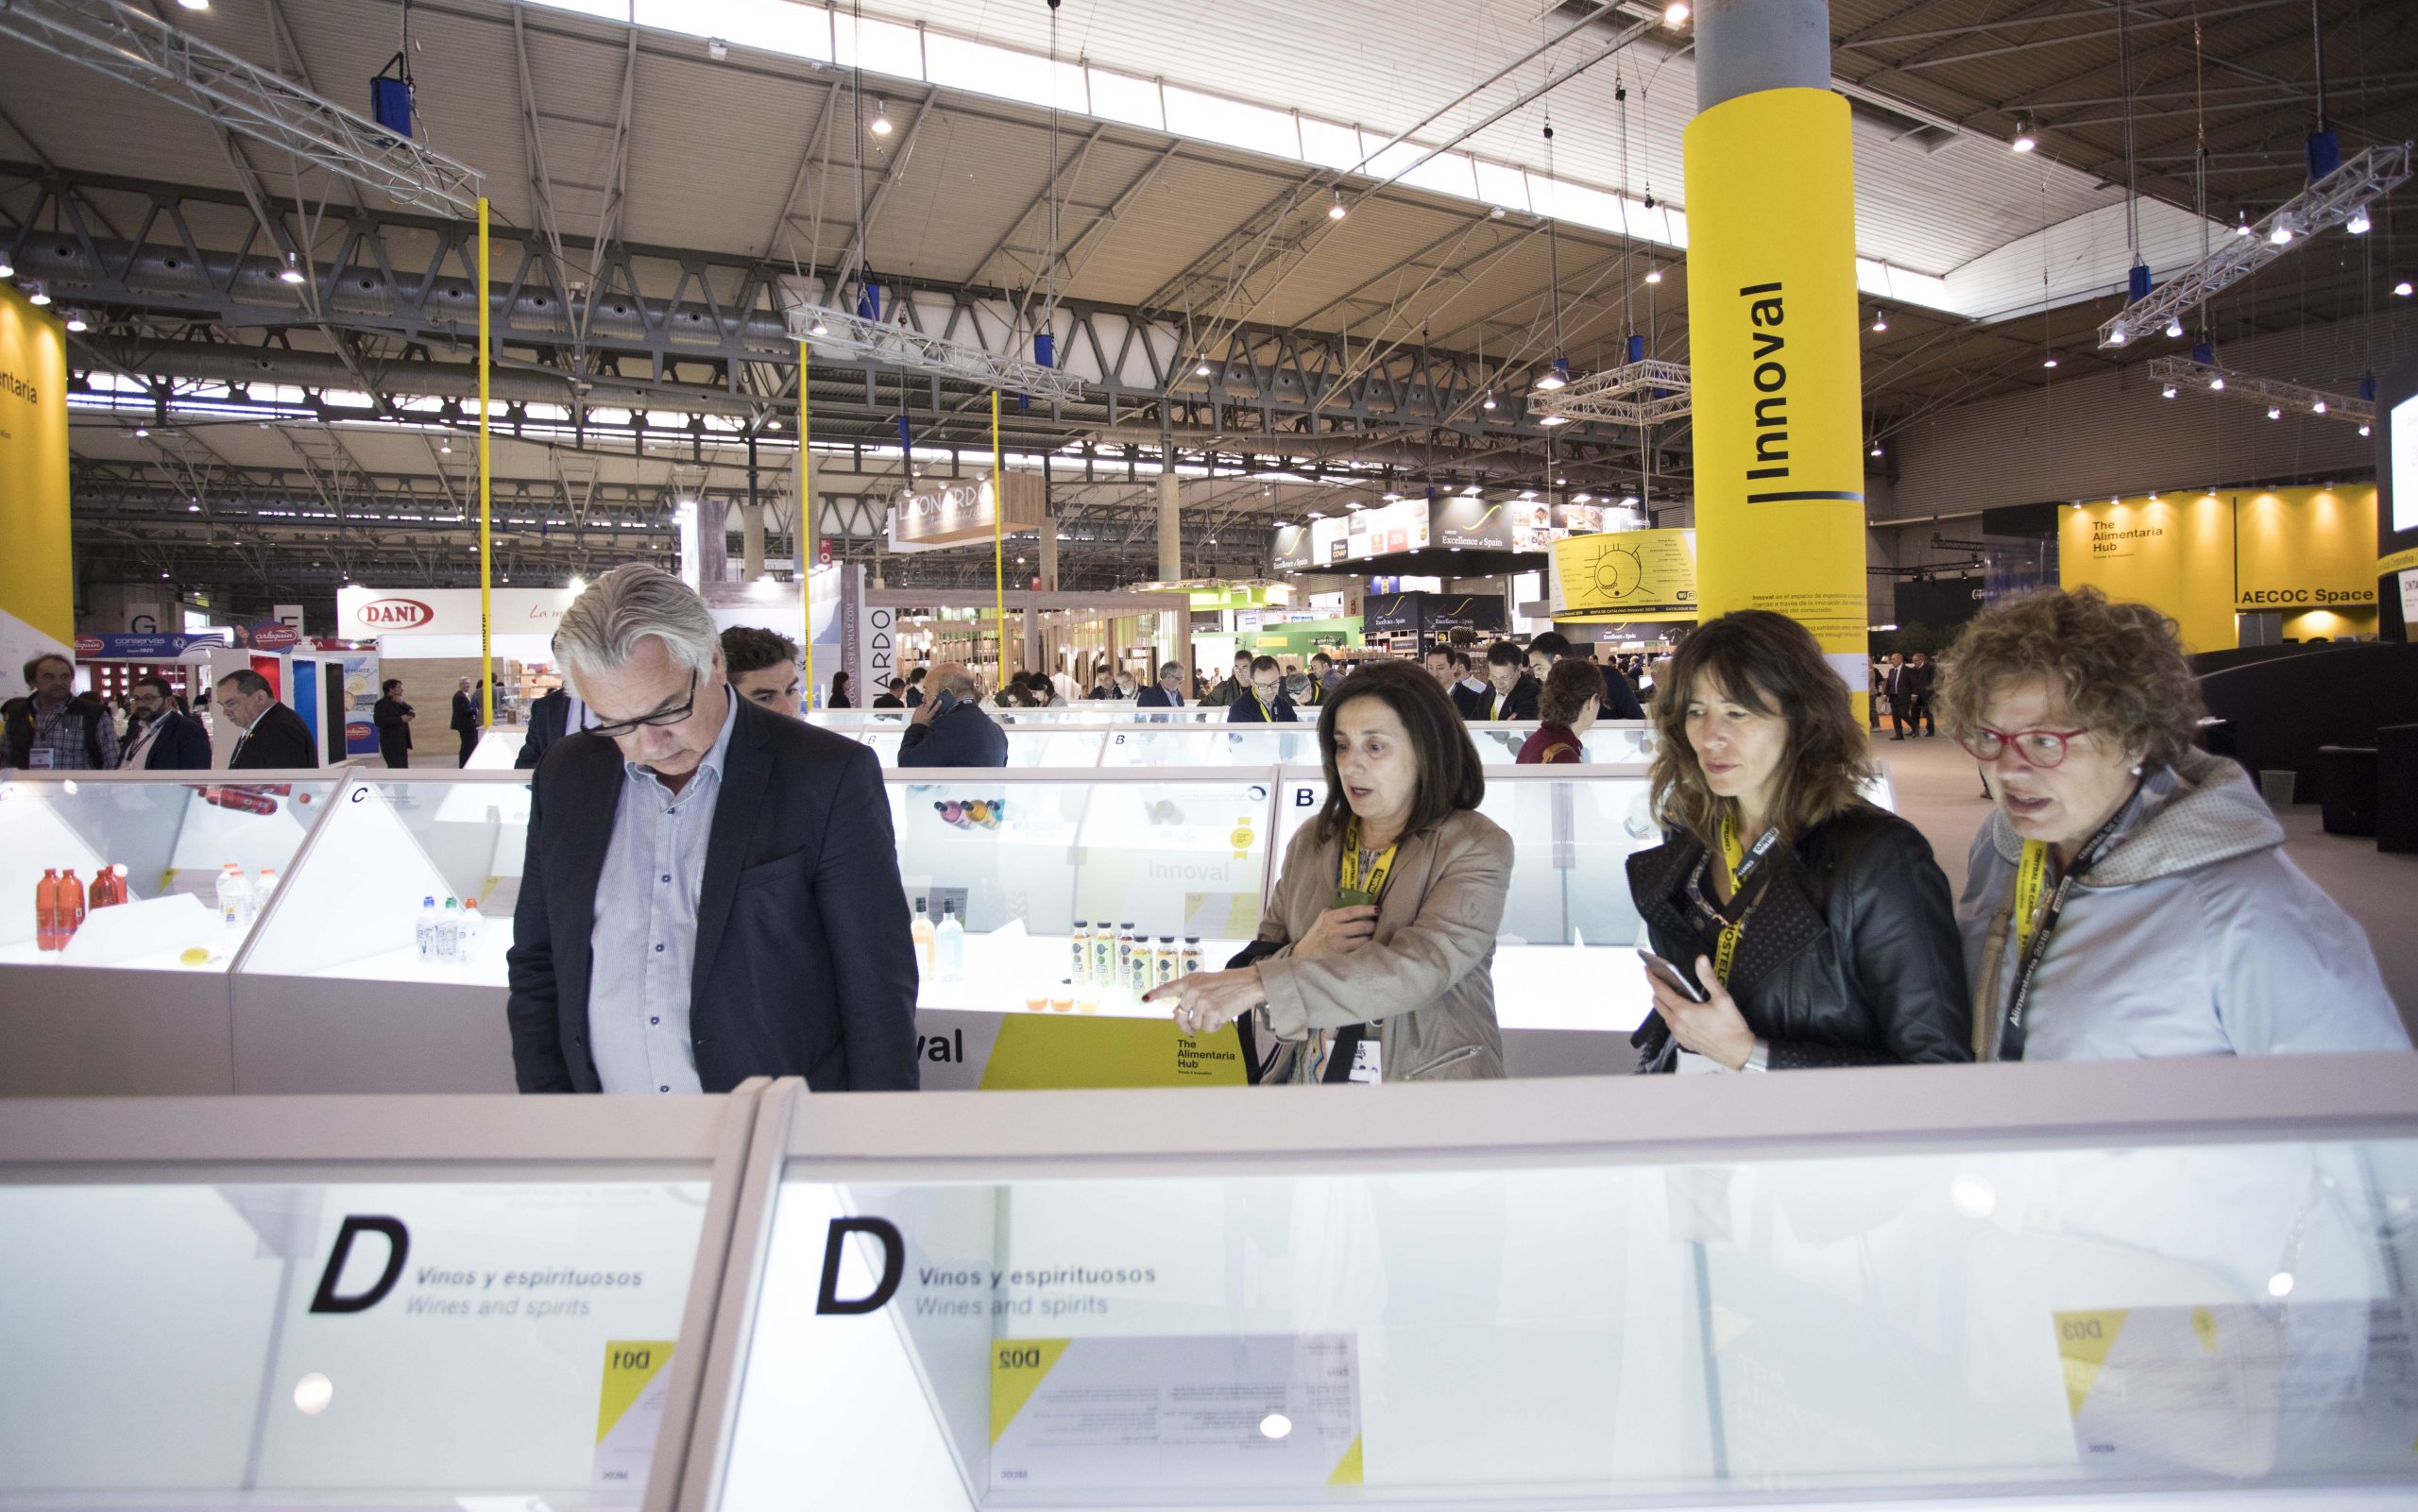 The chief innovations at the at Alimentaria 2018 show in Barcelona focused on healthier, better tasting food.